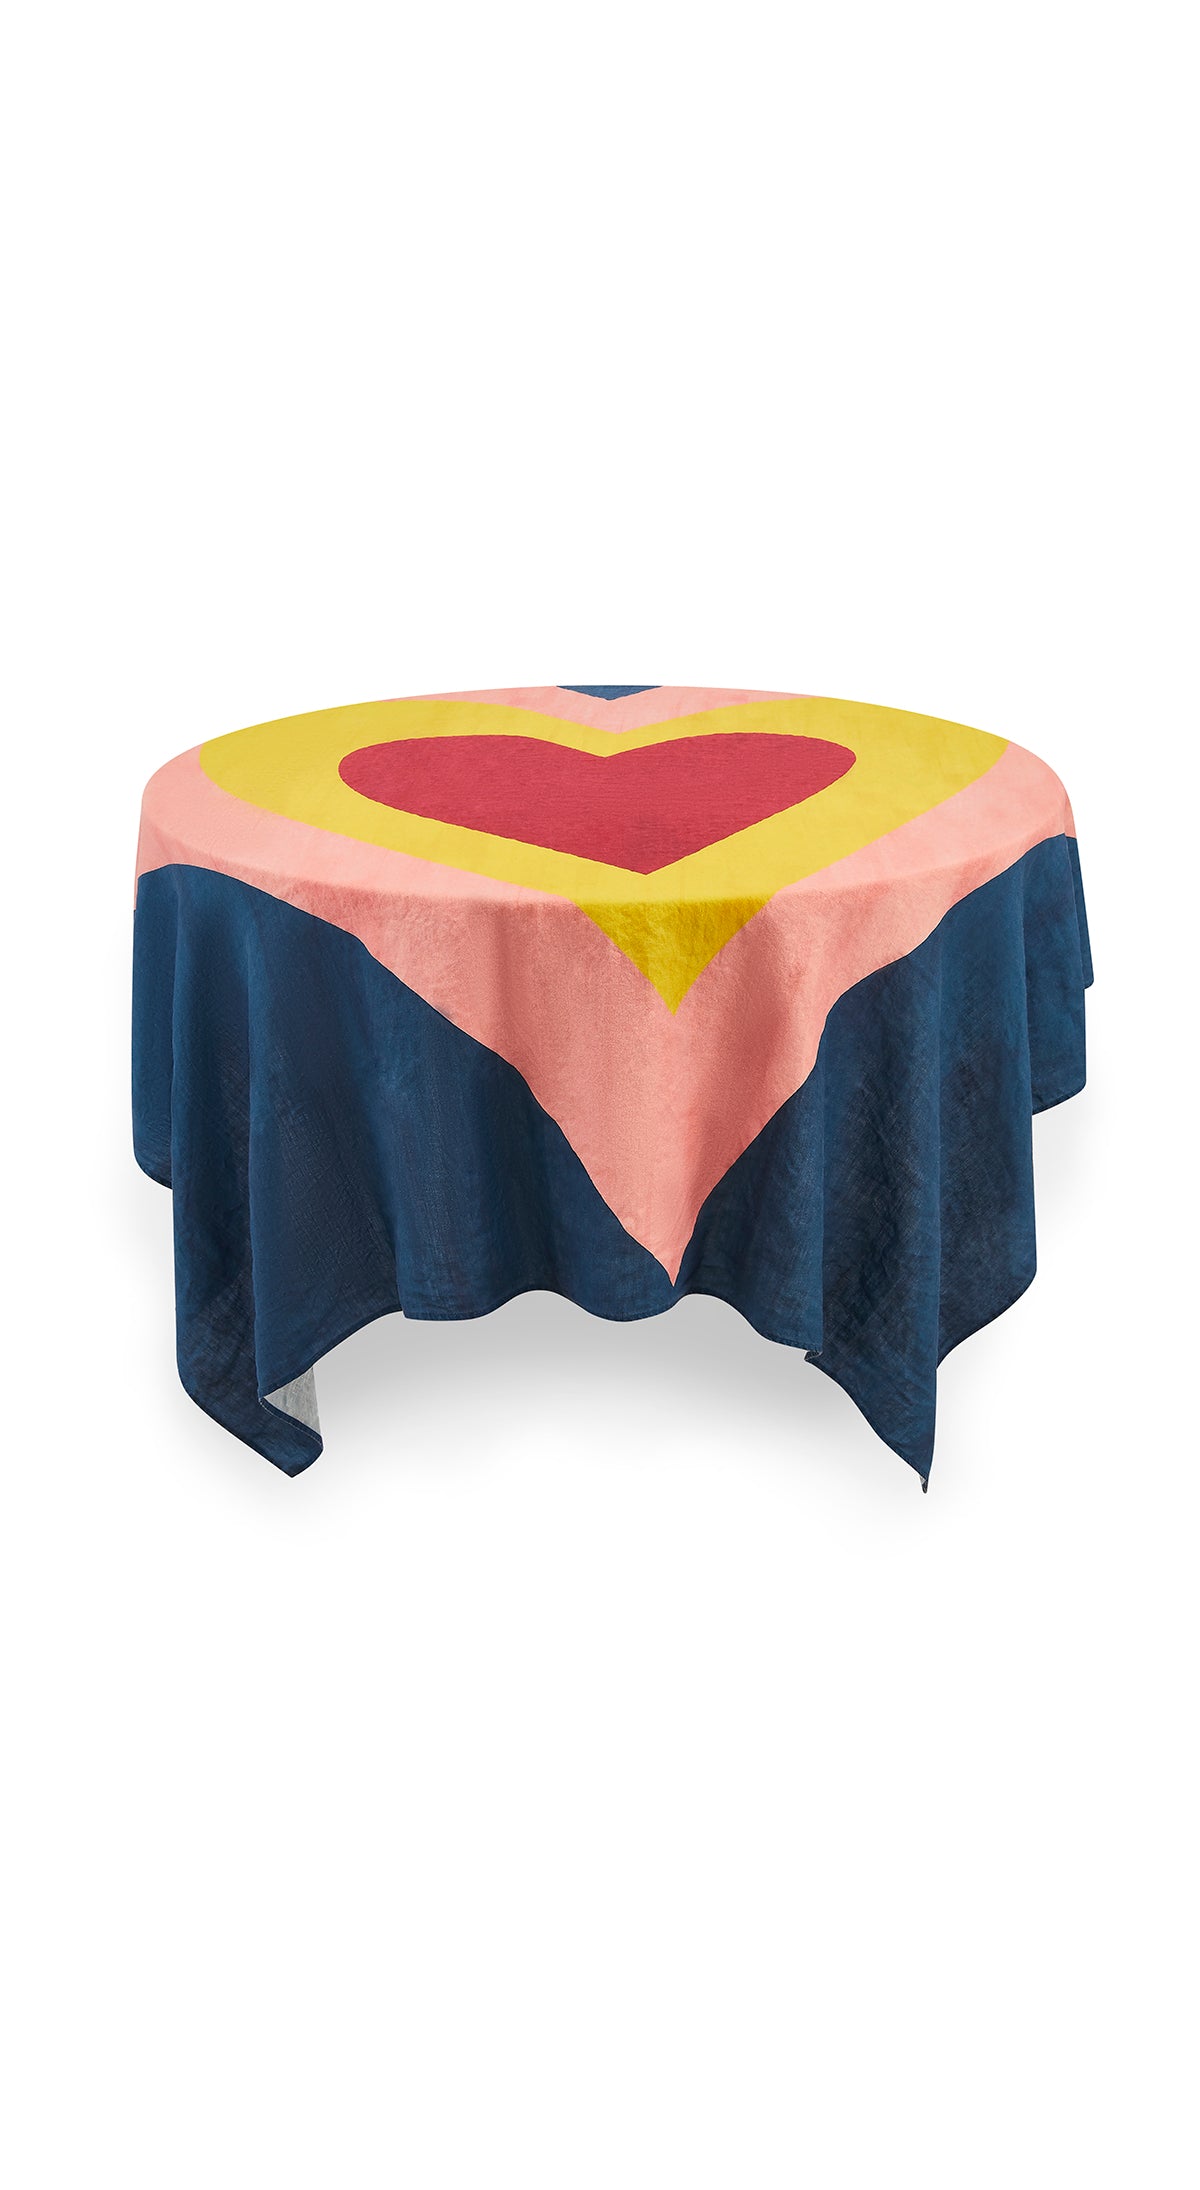 'Table for Two' Square Linen Heart Tablecloth in Blue, Pink, Yellow & Red, 165cm x 165cm